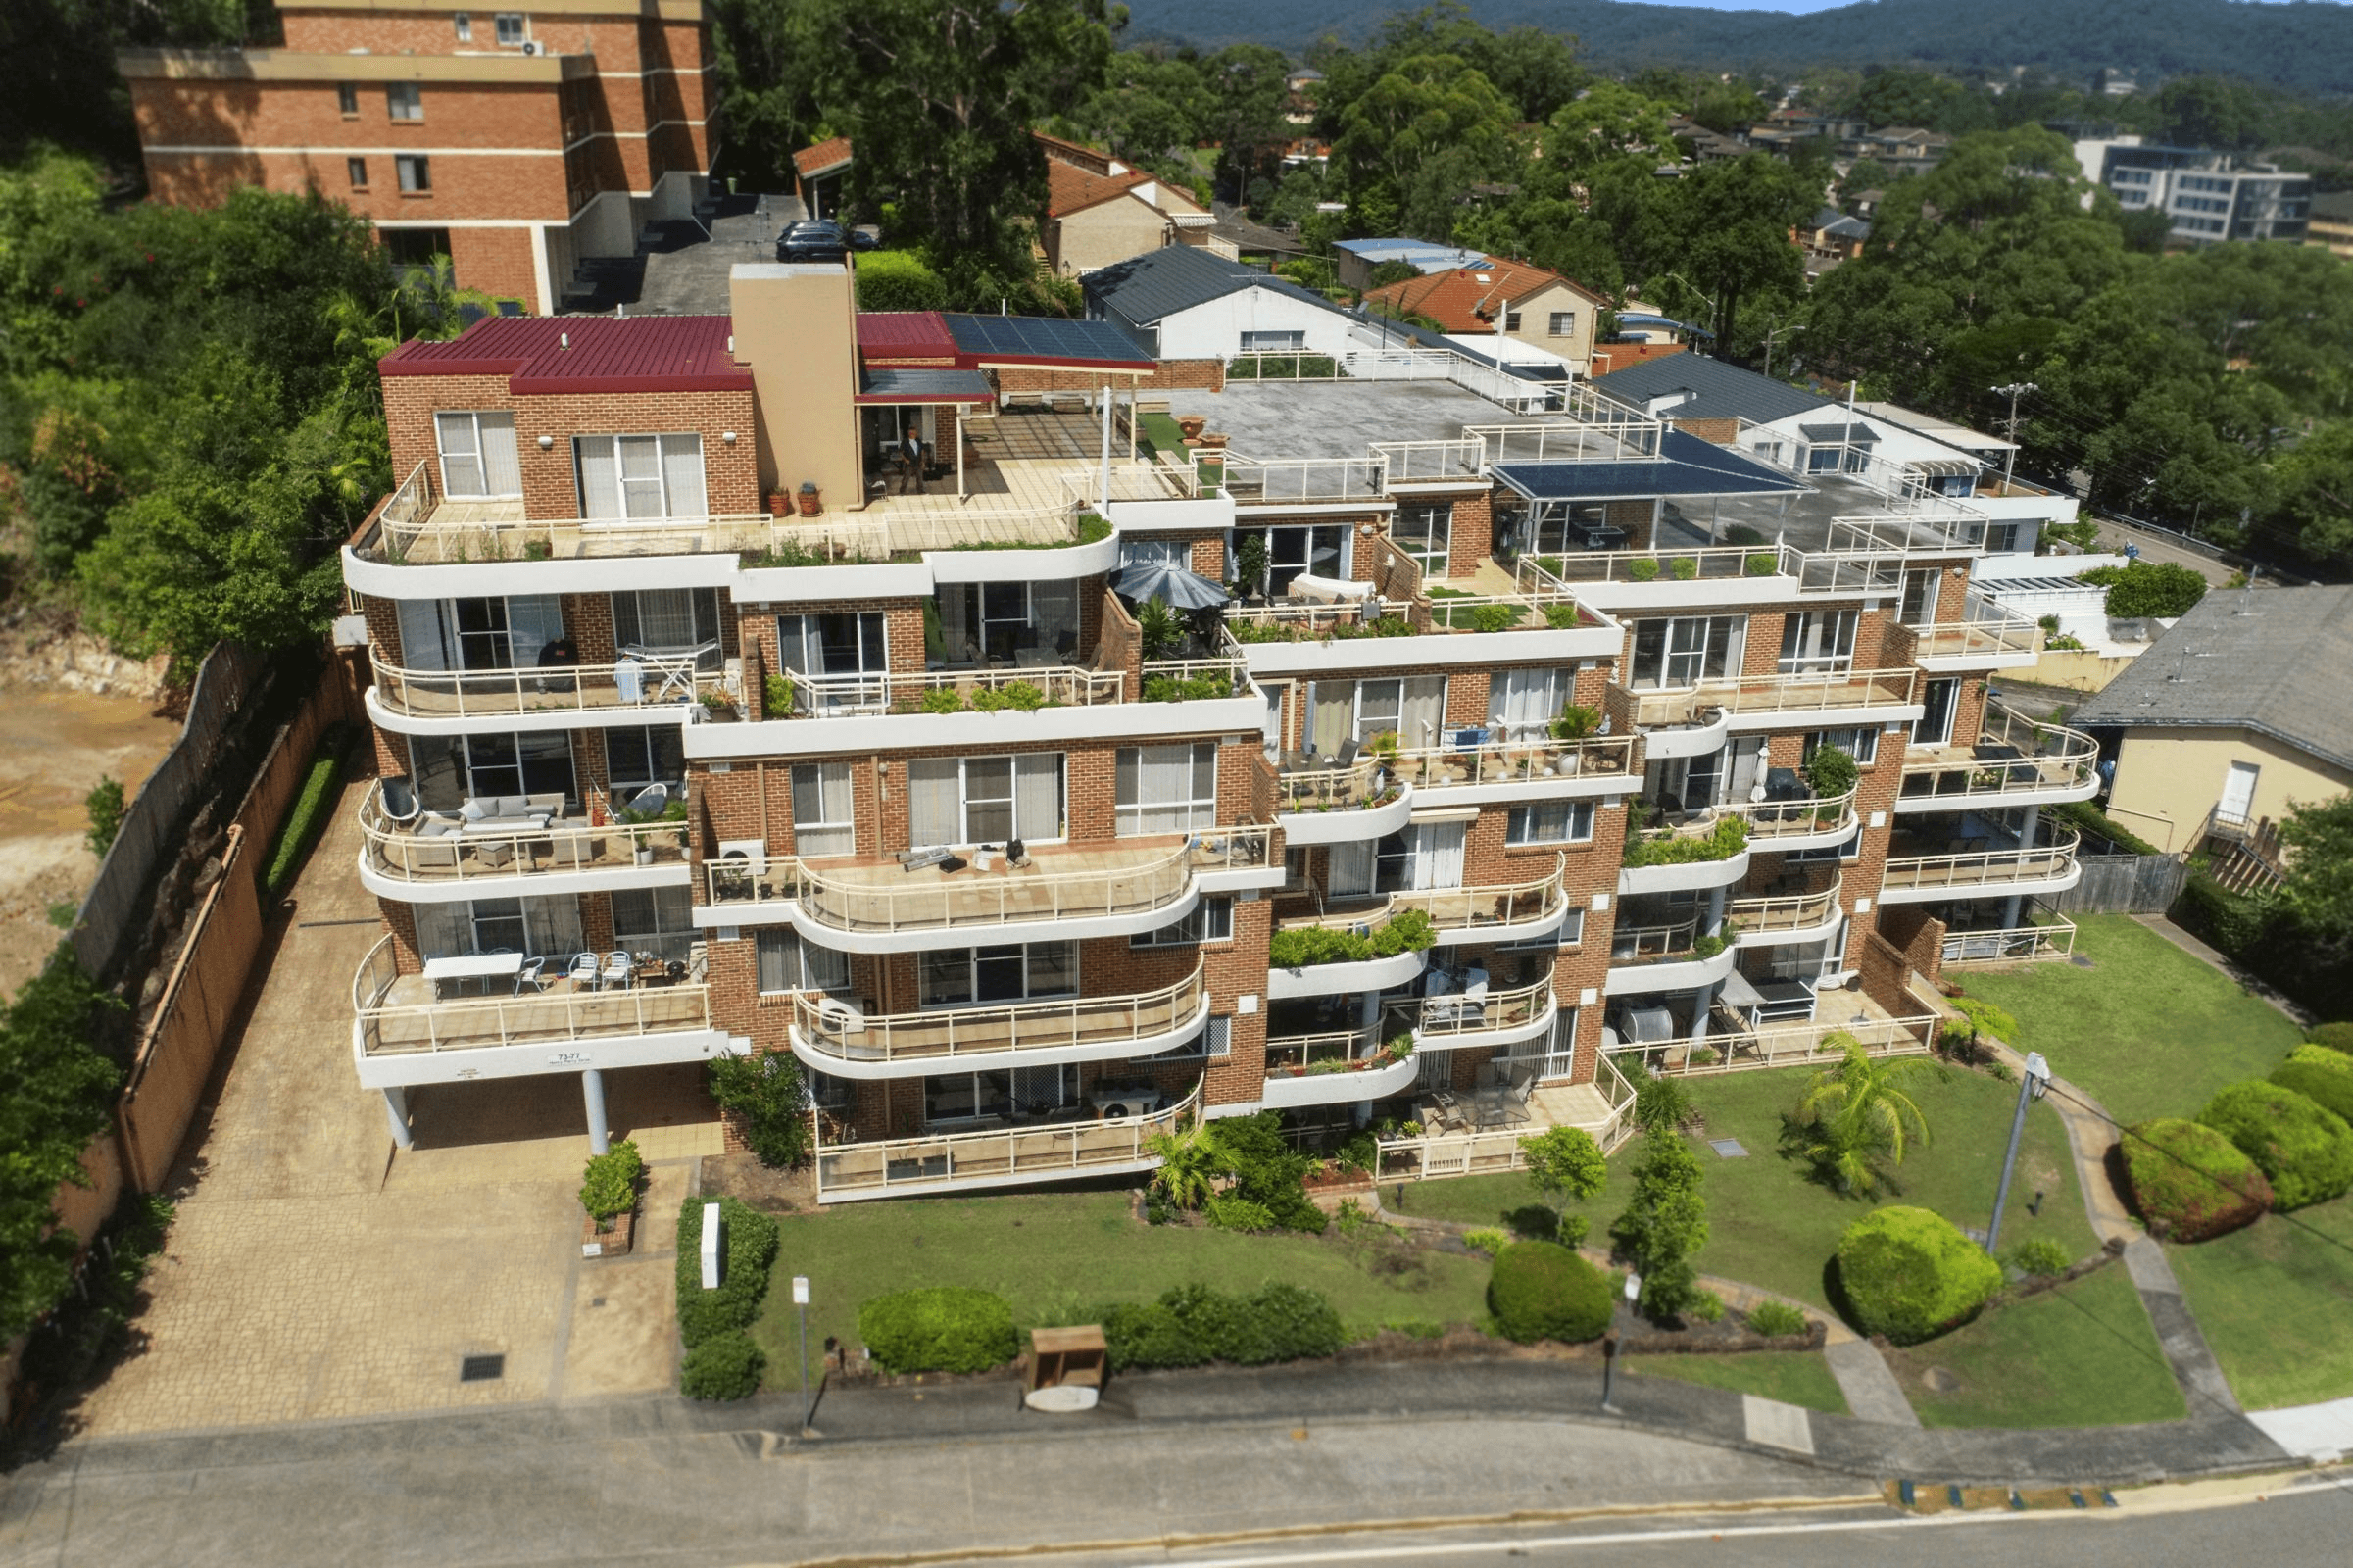 14/73-77 Henry Parry Drive, GOSFORD, NSW 2250